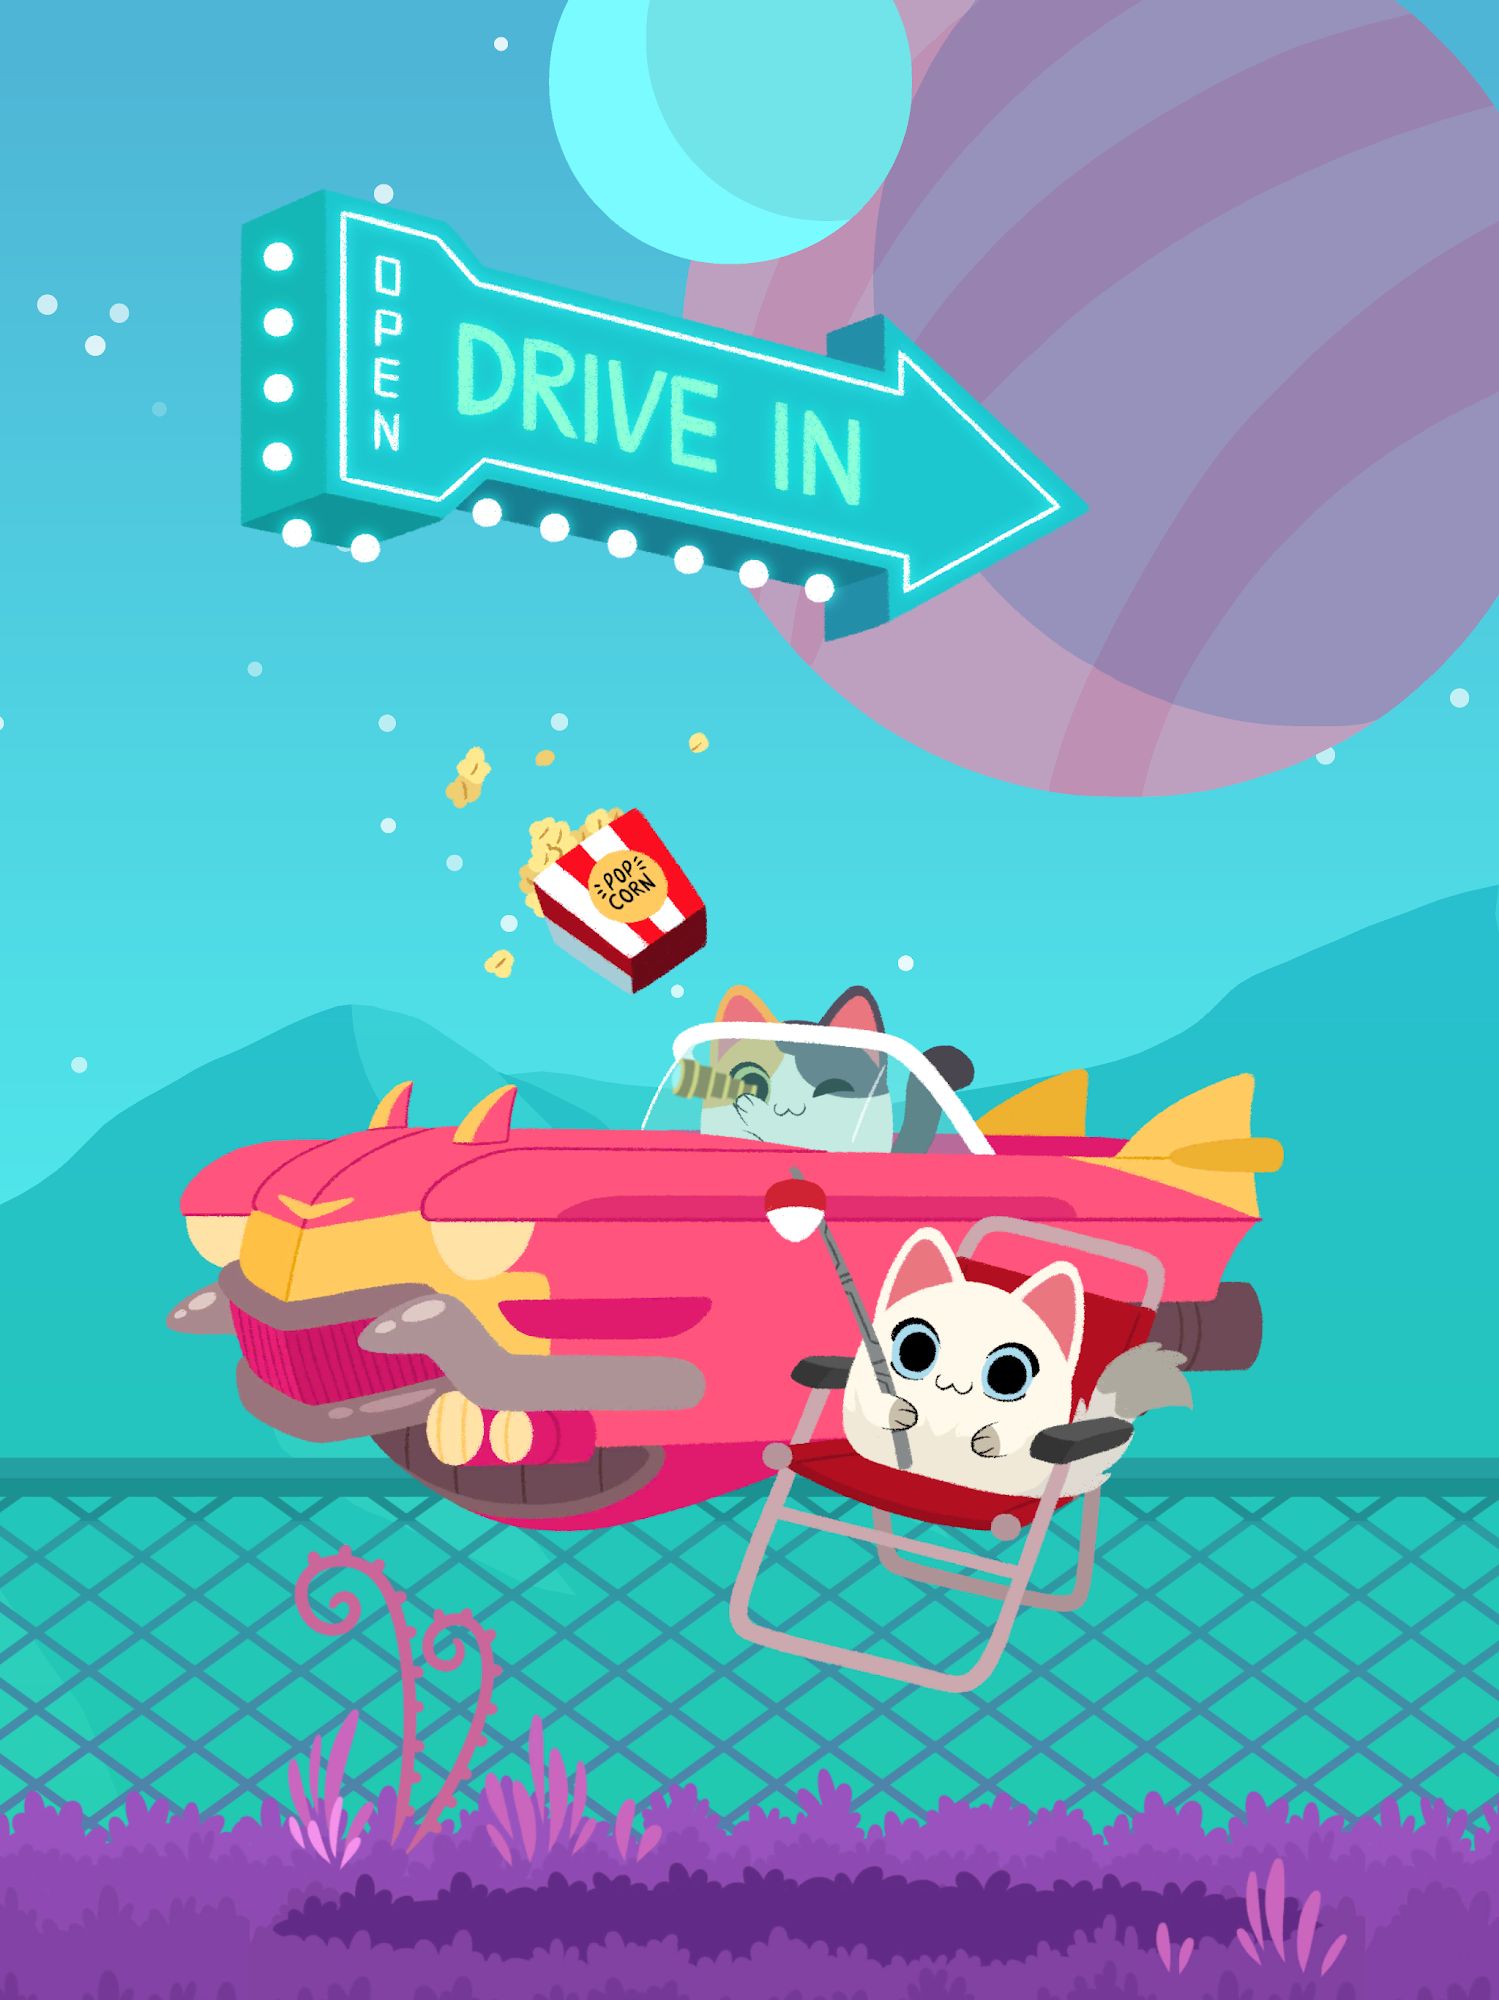 Sailor Cats 2: Space Odyssey for Android